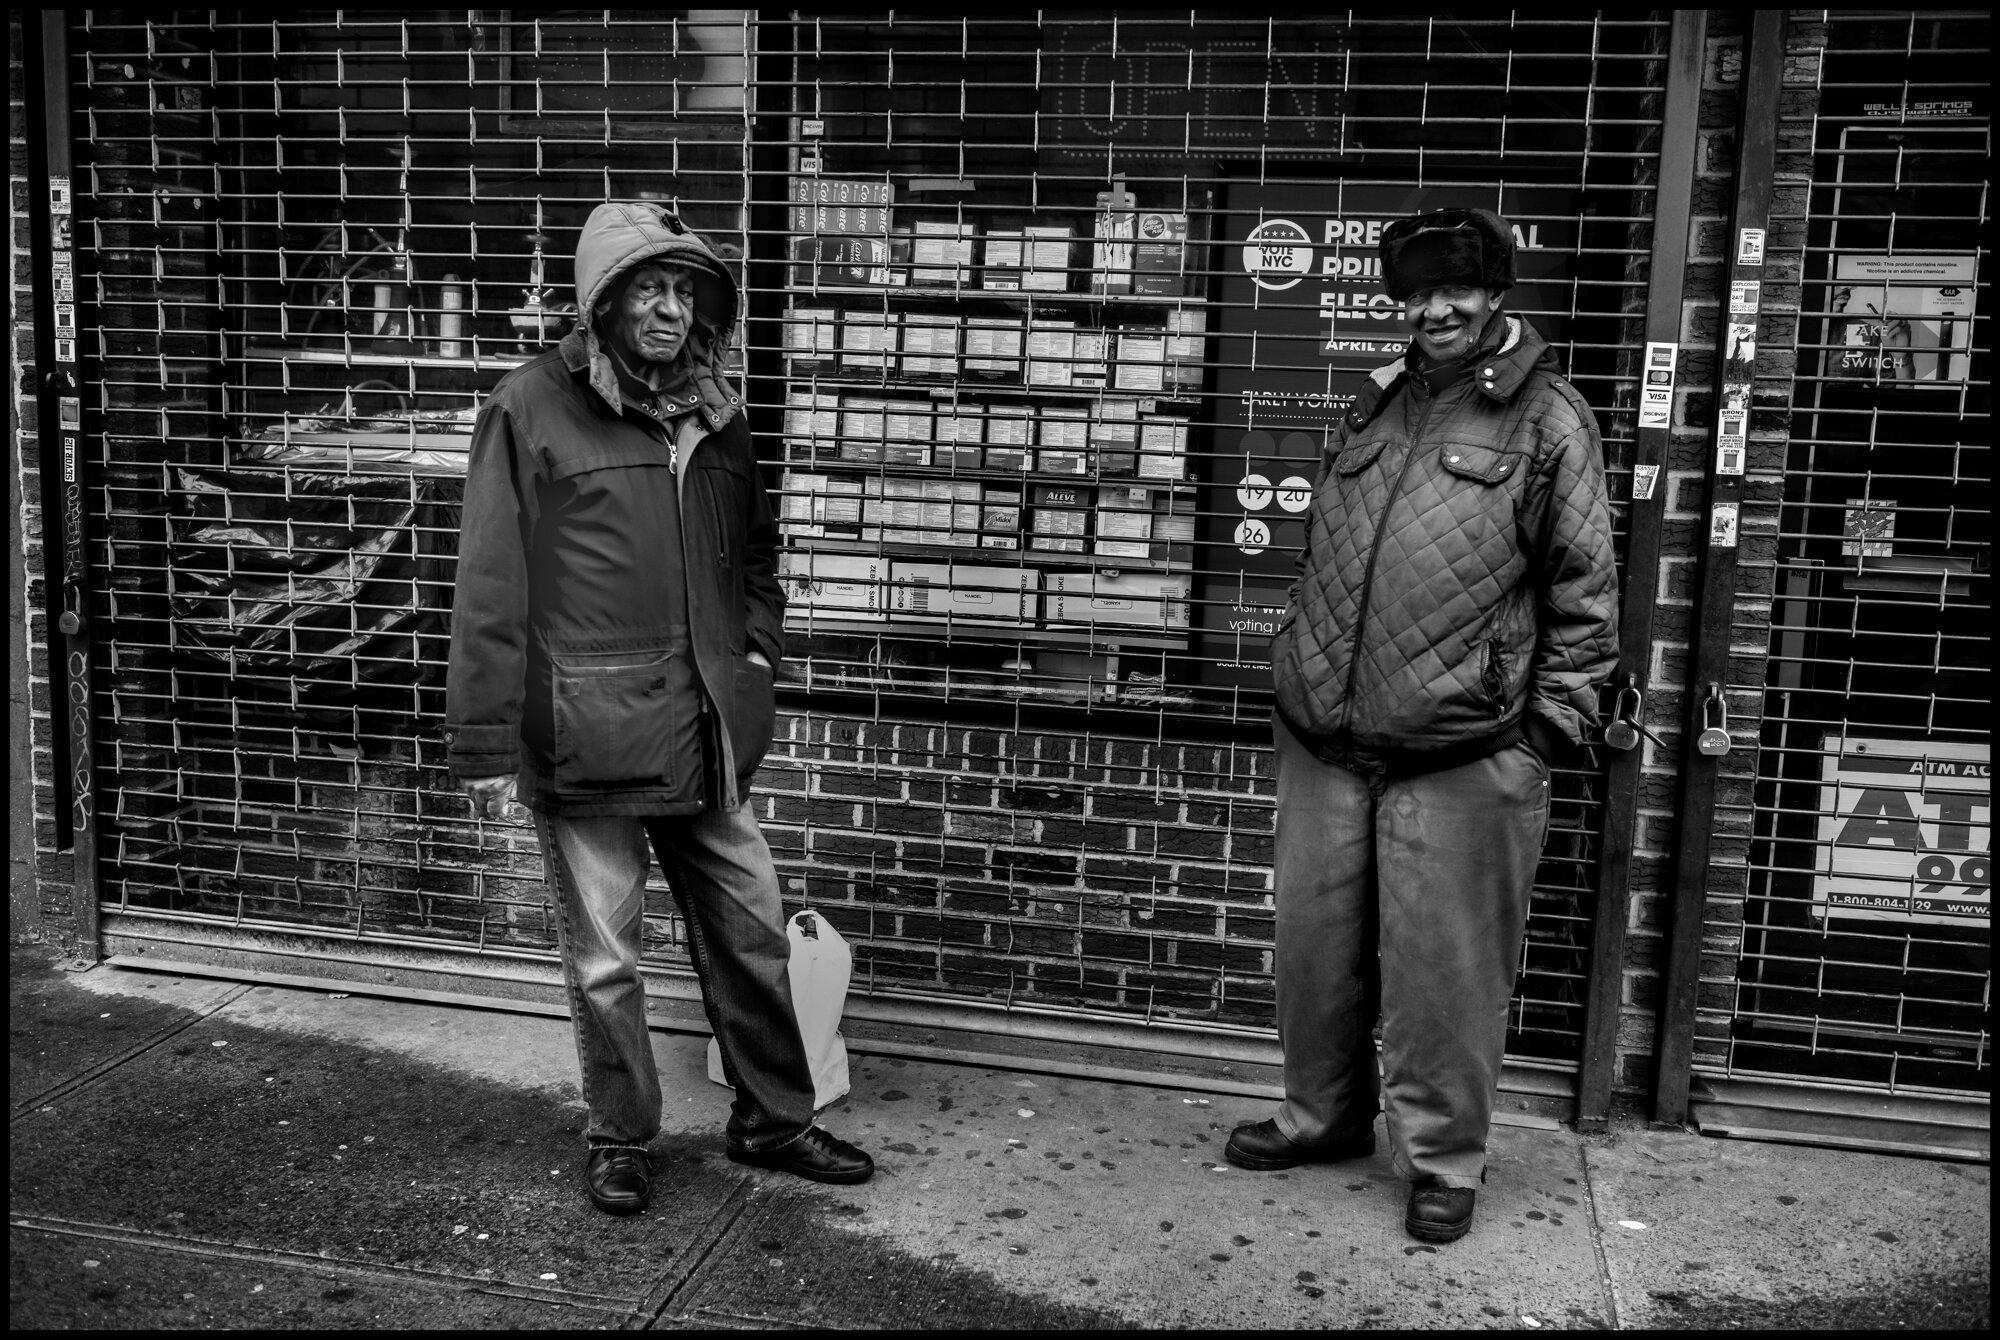  I encountered two gentlemen standing on the sidewalk about half a block from where I lived for seven years on Lenox Ave. and 133 Street. I asked the man on the left his name. He told me, “my name is OK.” I asked how he was making it and he told me, 